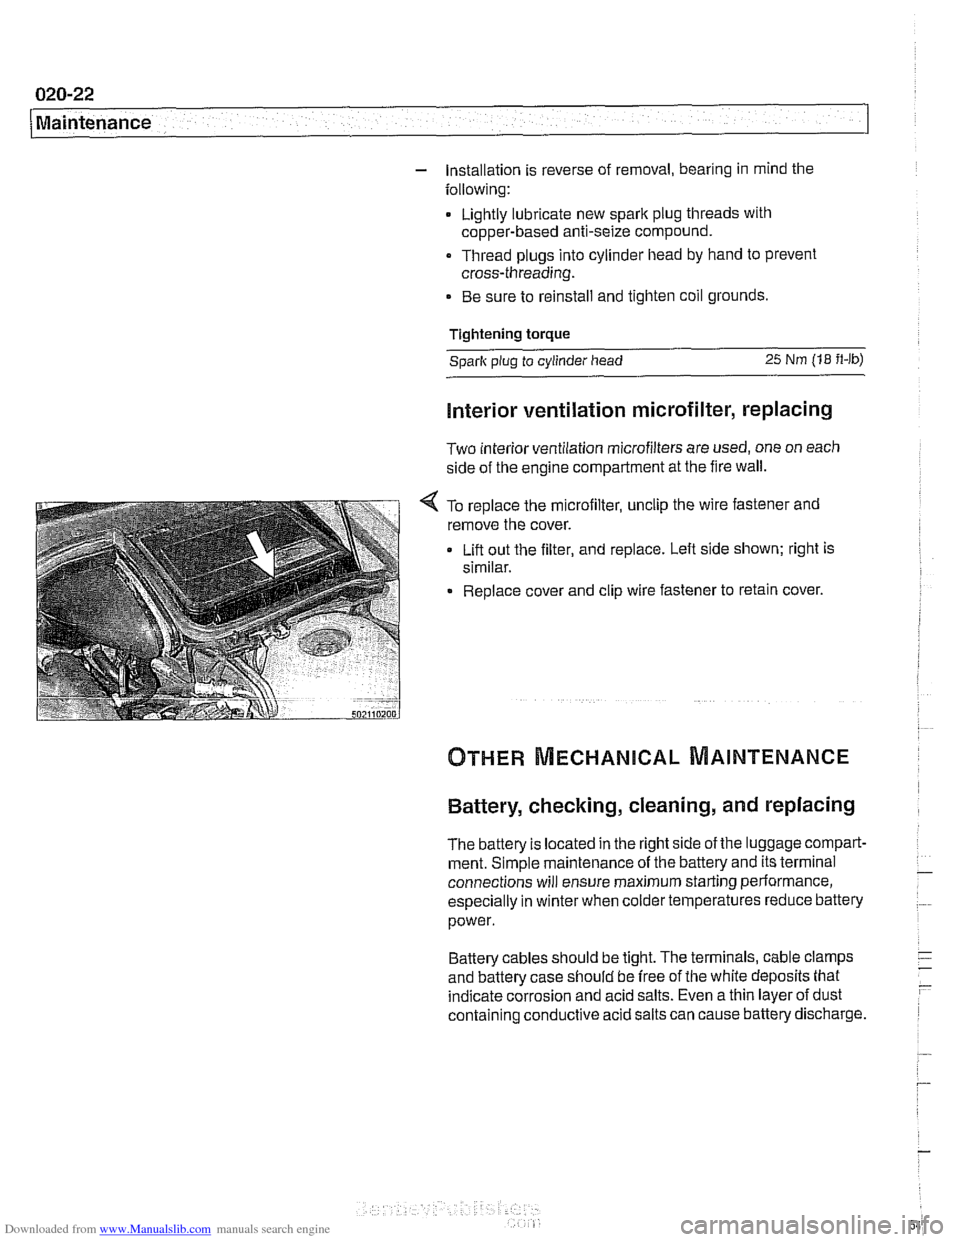 BMW 528i 1997 E39 Workshop Manual Downloaded from www.Manualslib.com manuals search engine 
020-22 Maintenance 
1 
- Installation is reverse  of removal,  bearing in mind  the 
following: 
Lightly lubricate  new 
spark plug  threads  